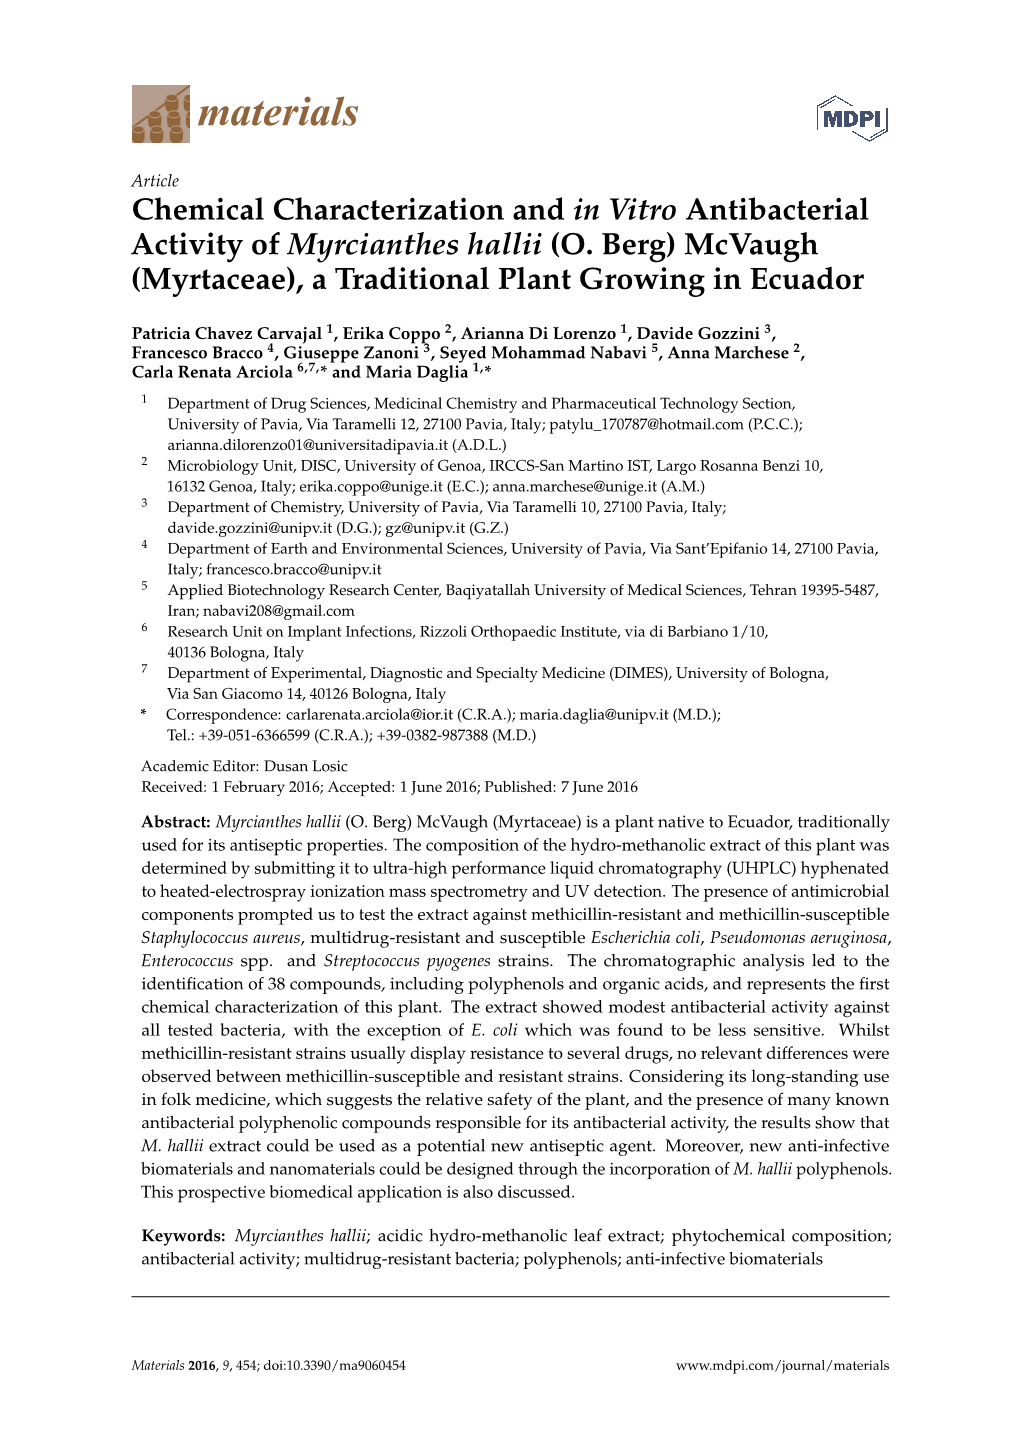 Chemical Characterization and in Vitro Antibacterial Activity of Myrcianthes Hallii (O